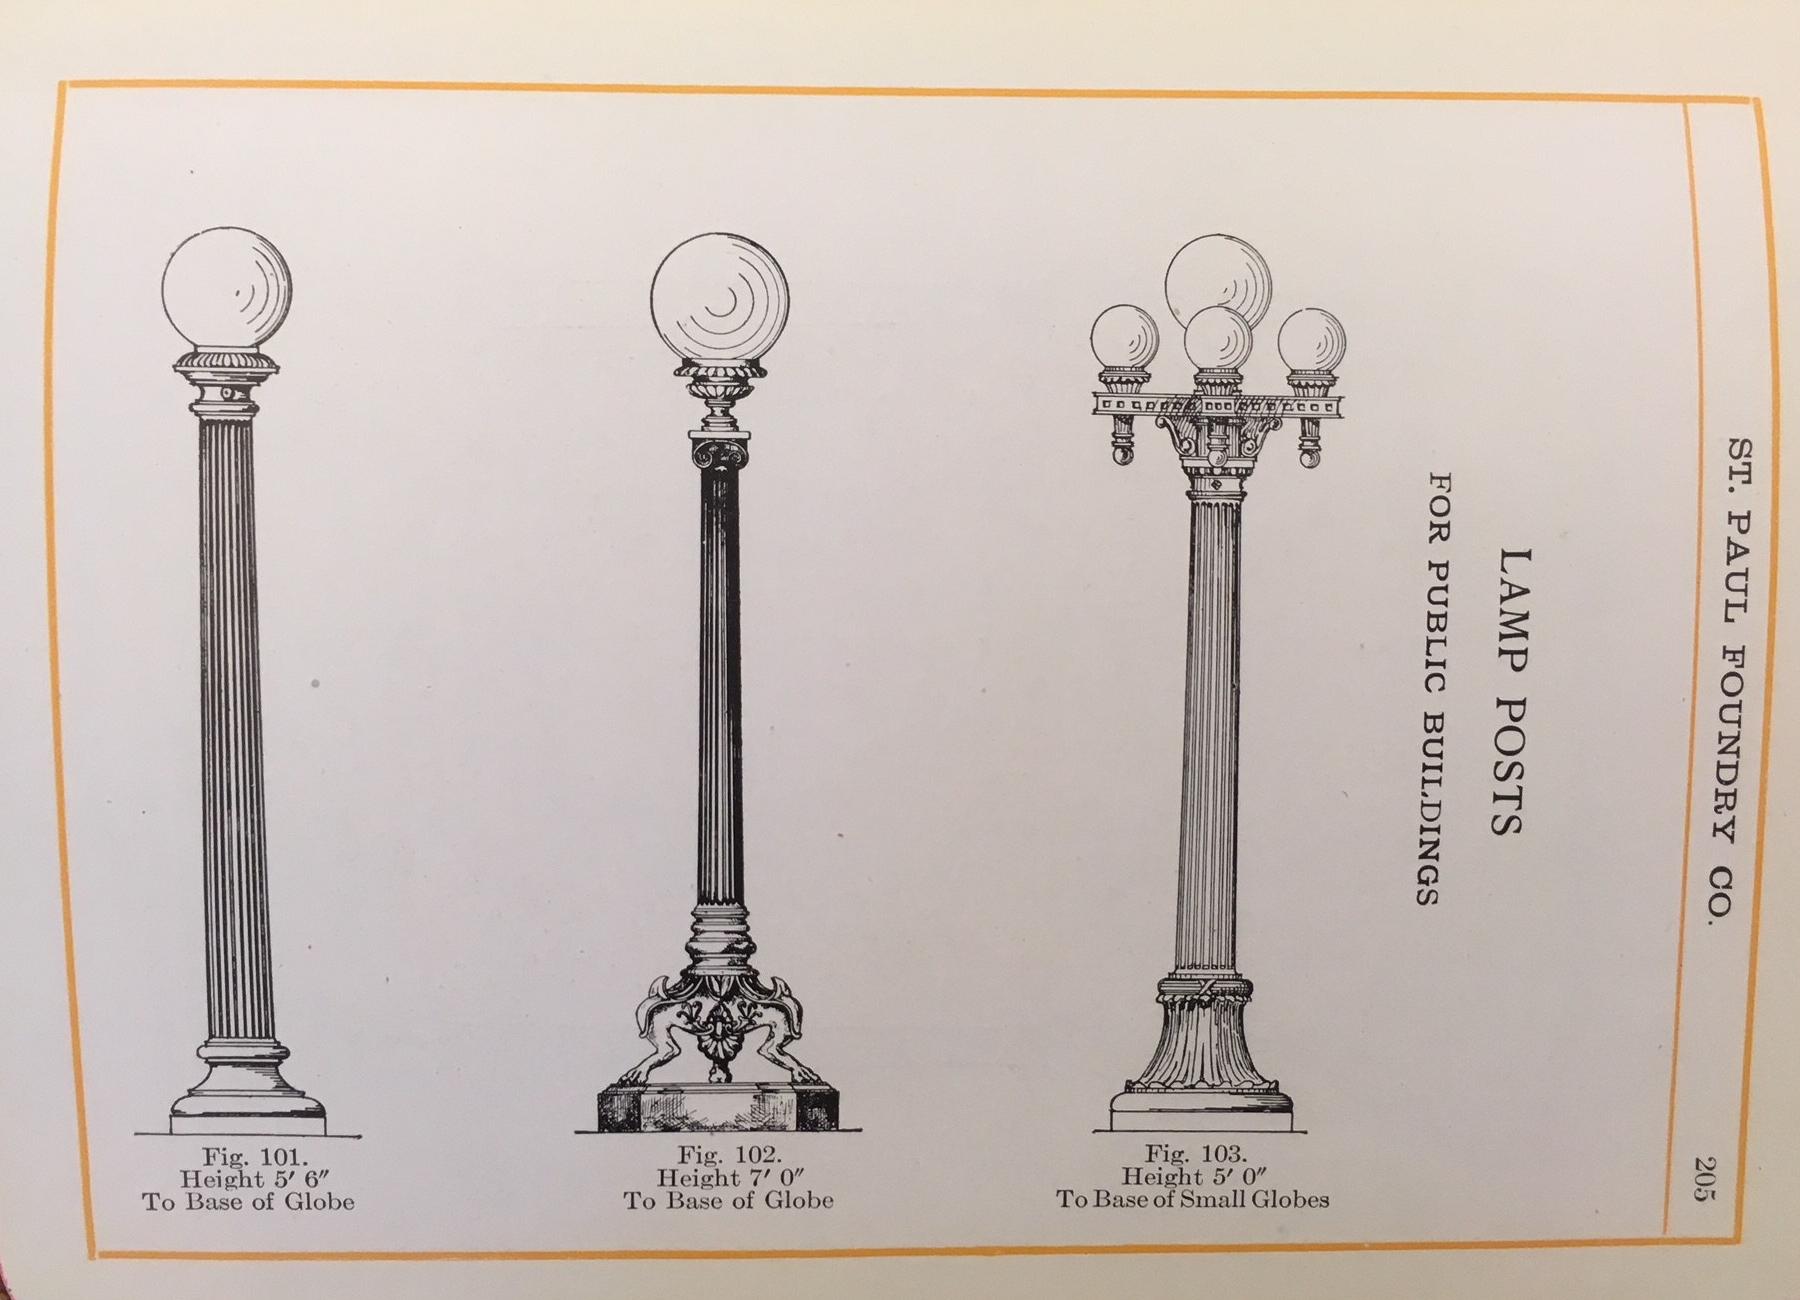 Light post casting was another successful line of products from the St. Paul Foundry.